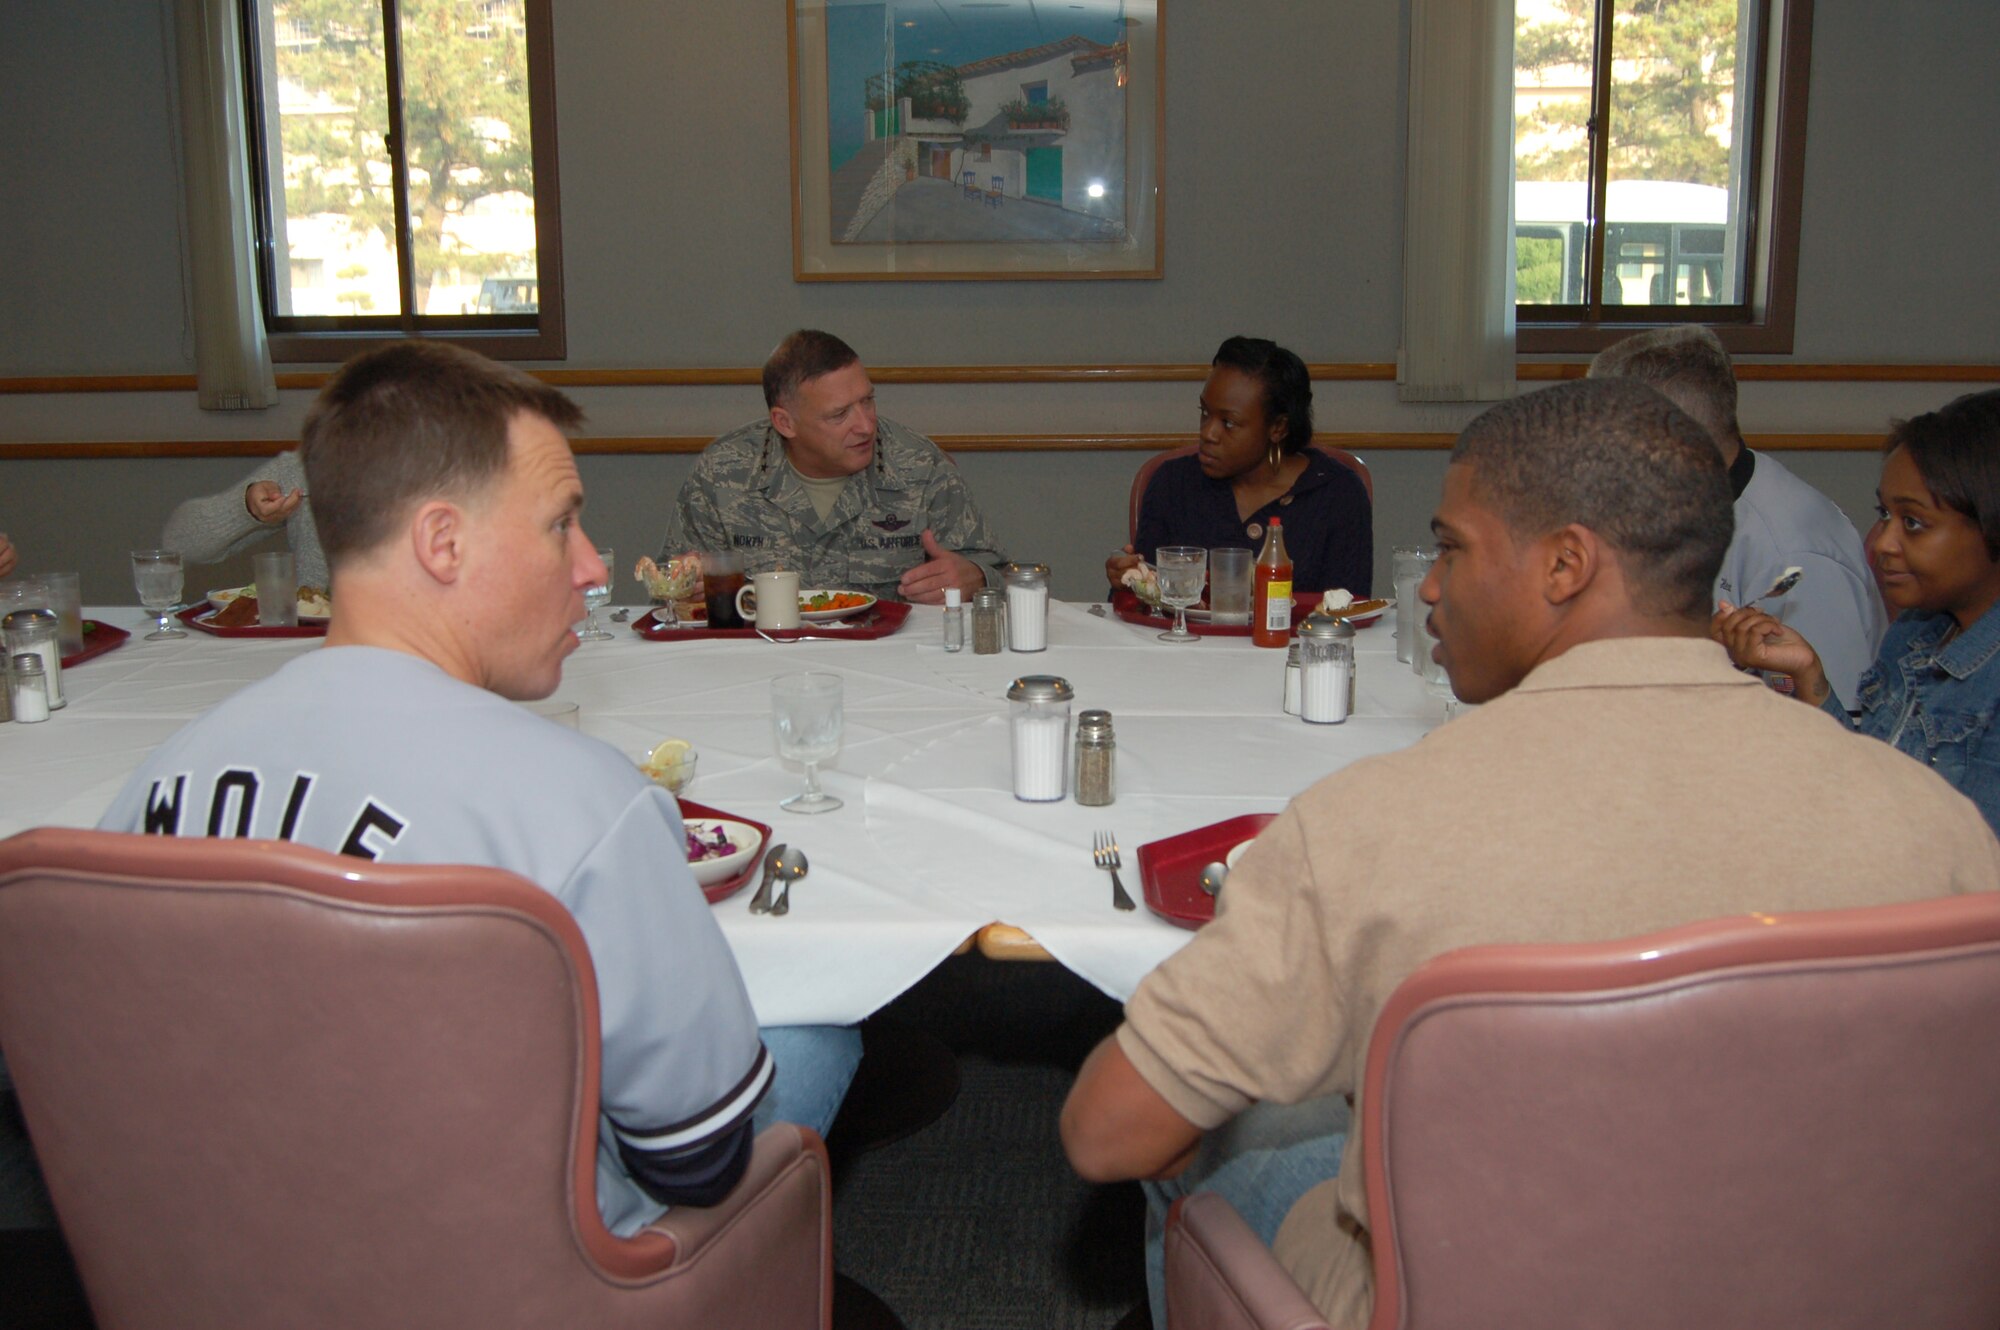 KUNSAN AIR BASE, Republic of Korea--Col. Robert Givens, 8th Fighter Wing commander, and Gen. Gary North, Pacific Air Forces commander, enjoy Thanksgiving dinner with Airmen at the O’Malley Dining Facility 26 November.  Gen. North visited Kunsan with senior leaders from PACAF and the 7th Air Force and members of the PACAF Civilian Advisory Council to help serve the holiday meal and dine with Wolf Pack members. Leaders engaged Airmen in a variety of topics of discussion during this event. (U.S. Air Force photo/Master Sgt. Anna Hayman)